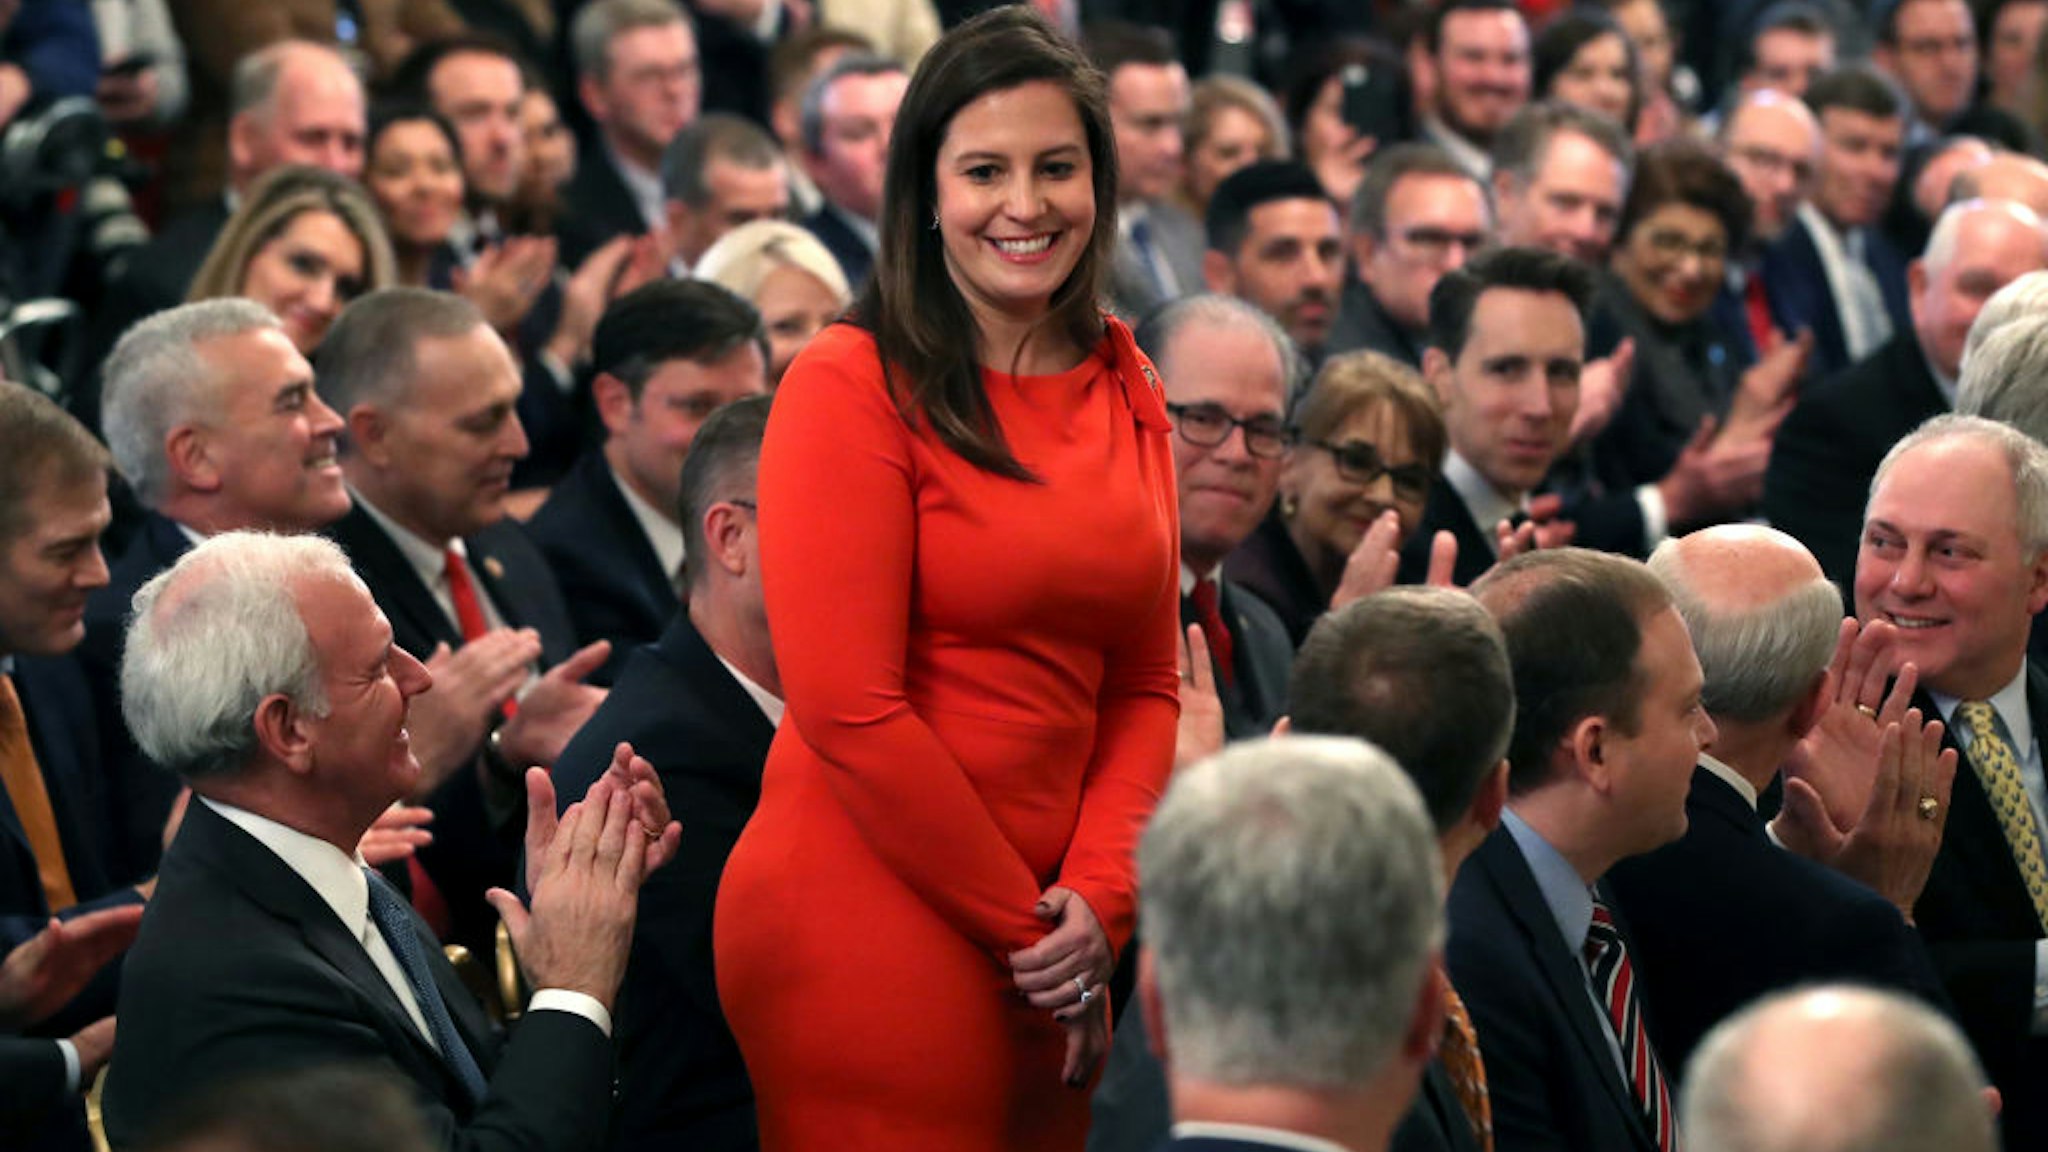 WASHINGTON, DC - FEBRUARY 06: Rep. Elise Stefanik (R-NY) (C) stands as she's acknowledged by U.S. President Donald Trump as he speaks one day after the U.S. Senate acquitted on two articles of impeachment, in the East Room of the White House February 6, 2020 in Washington, DC. After five months of congressional hearings and investigations about President Trump’s dealings with Ukraine, the U.S. Senate formally acquitted the president of charges that he abused his power and obstructed Congress. (Photo by Mark Wilson/Getty Images)